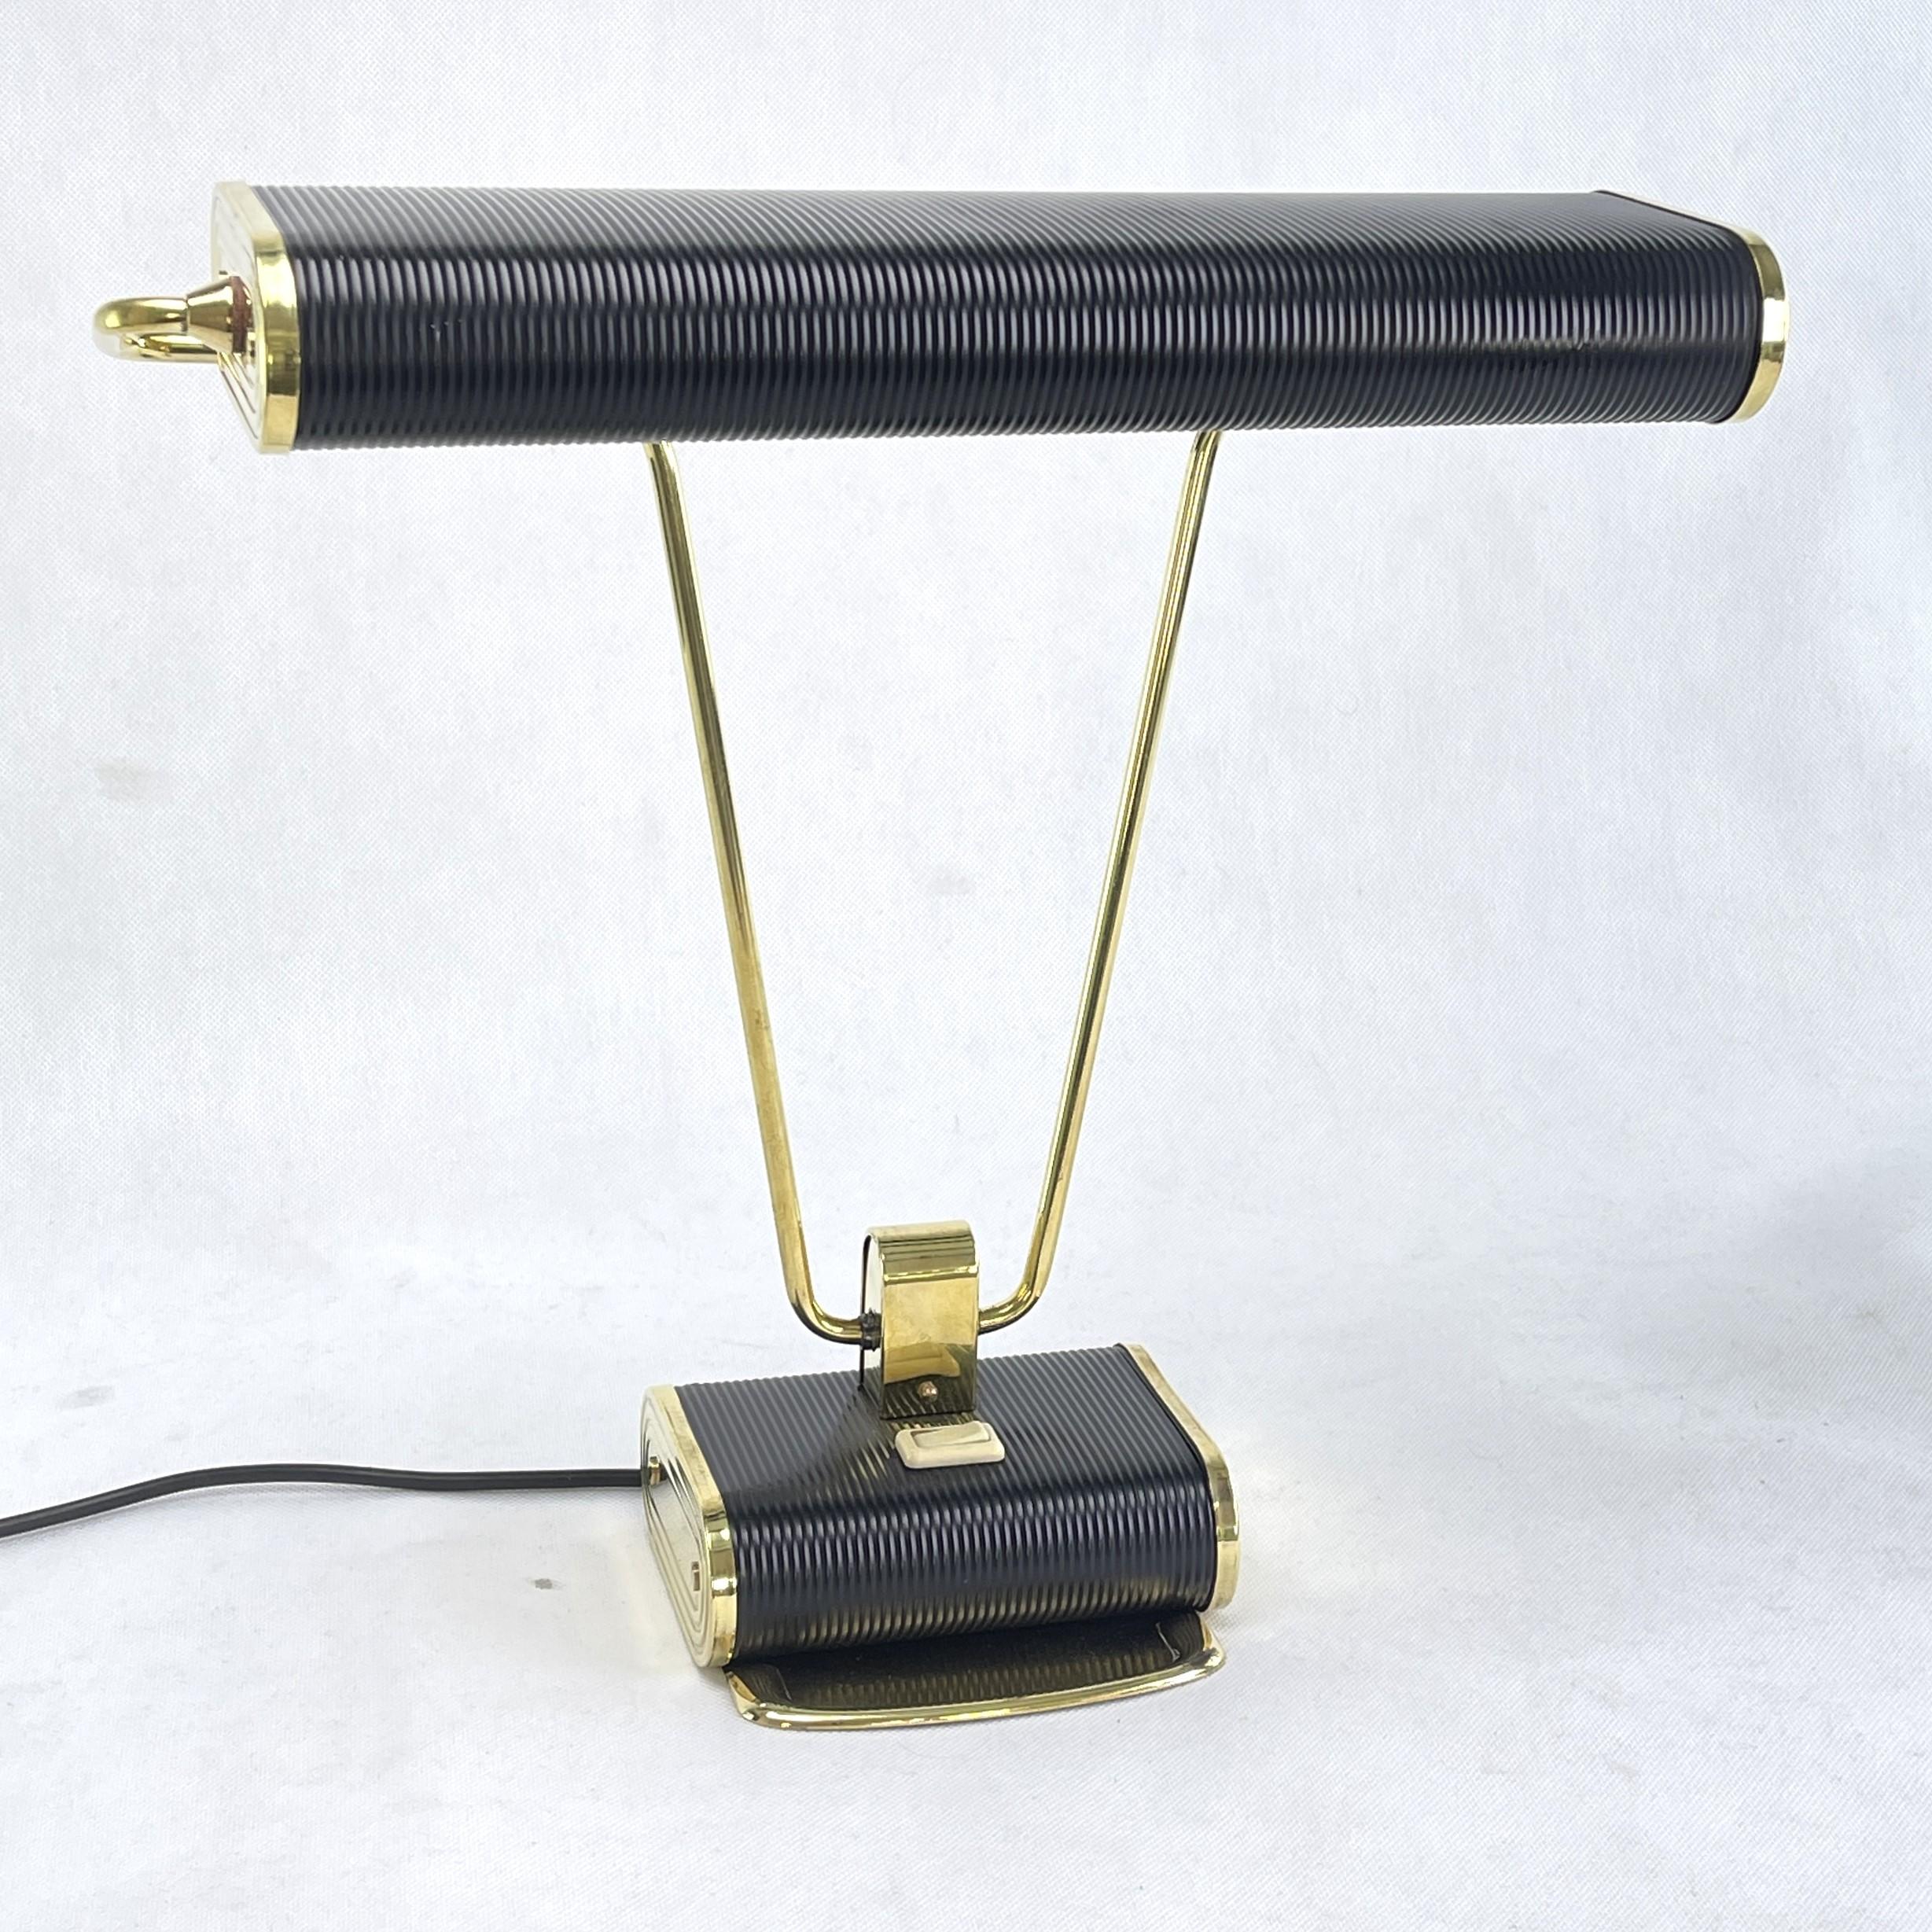 Art Deco table lamp from JUMO - Model N71

This original Art Deco desk lamp is often attributed to the legendary designer Eileen Gray. However, this popular desk lamp was designed by André Mounique and unmistakably combines the elegance and